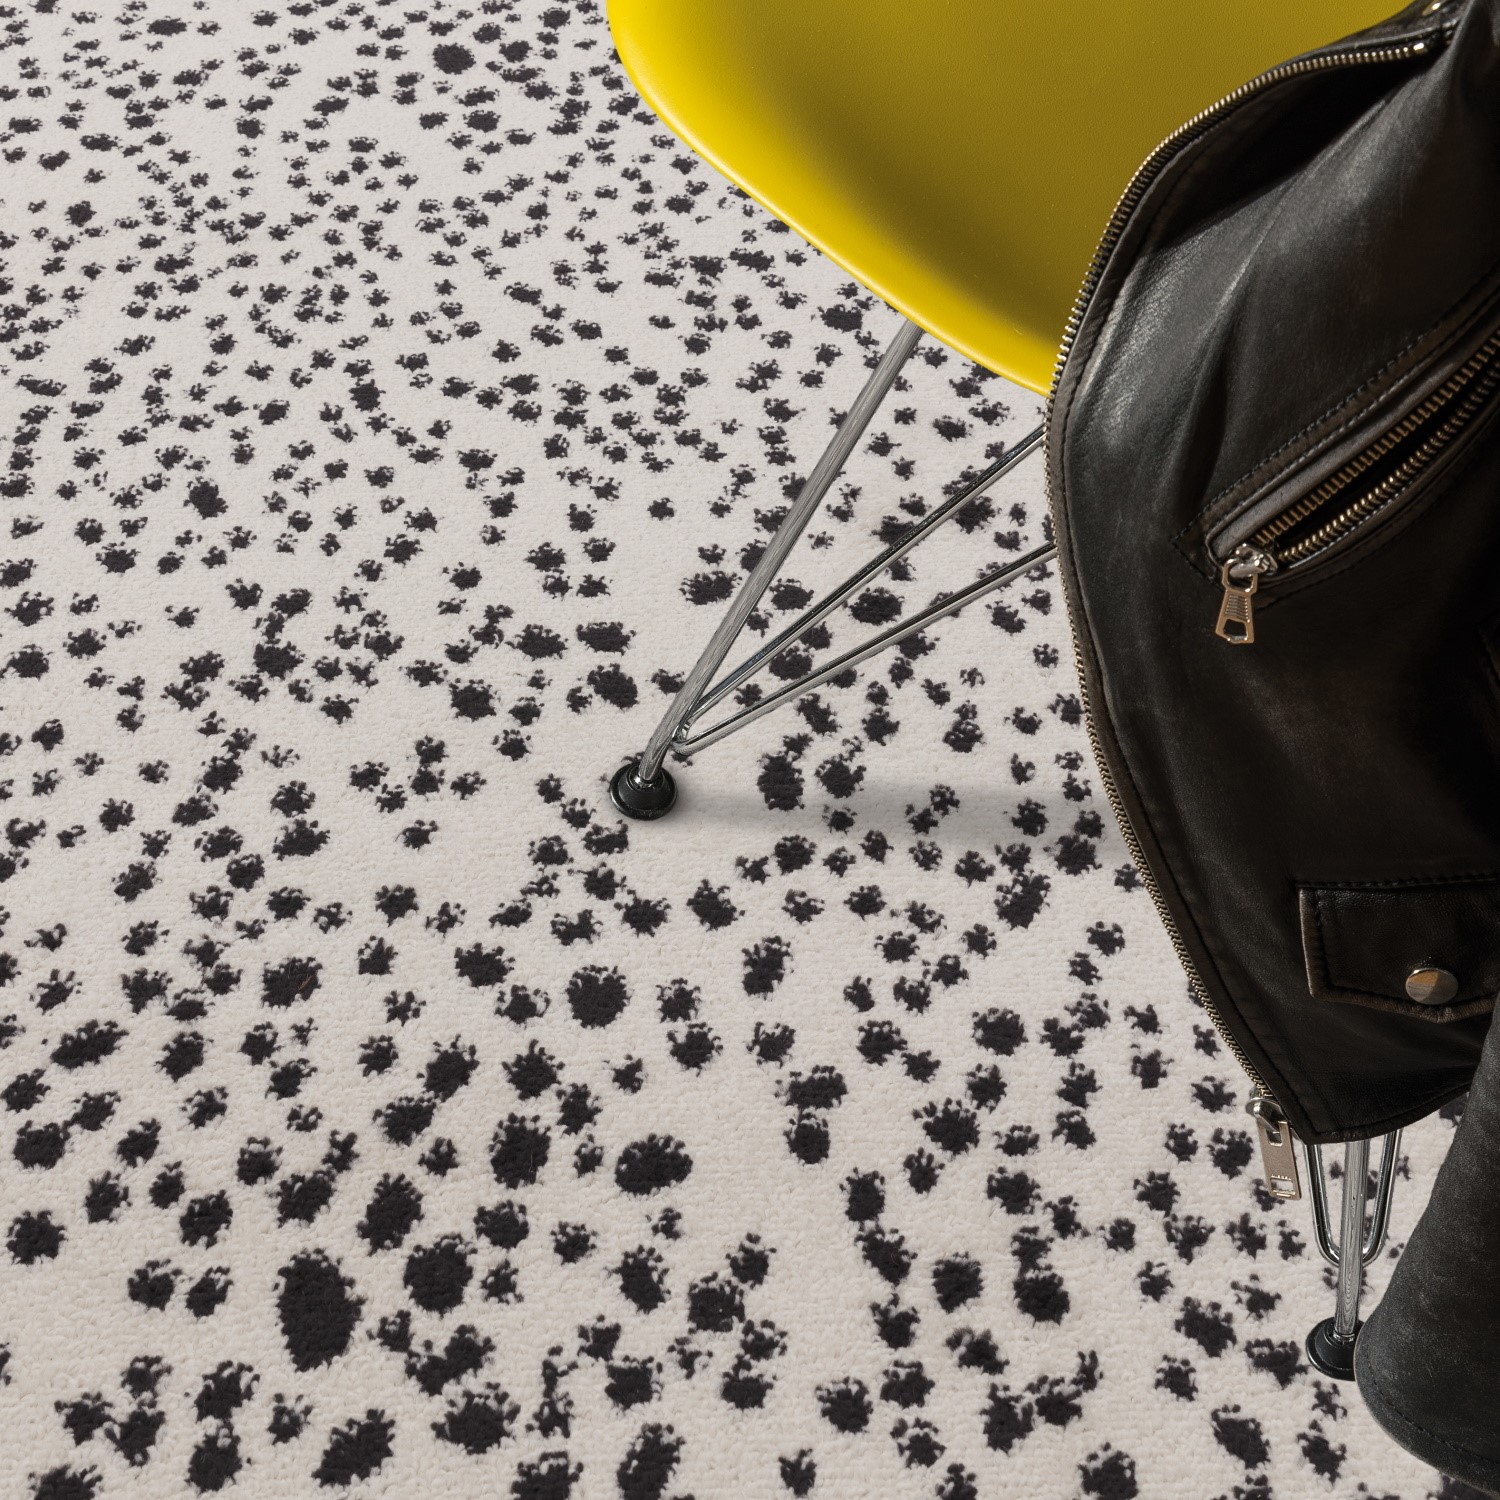 Read more about Black spotty runner rug 80 x 150 cm muse